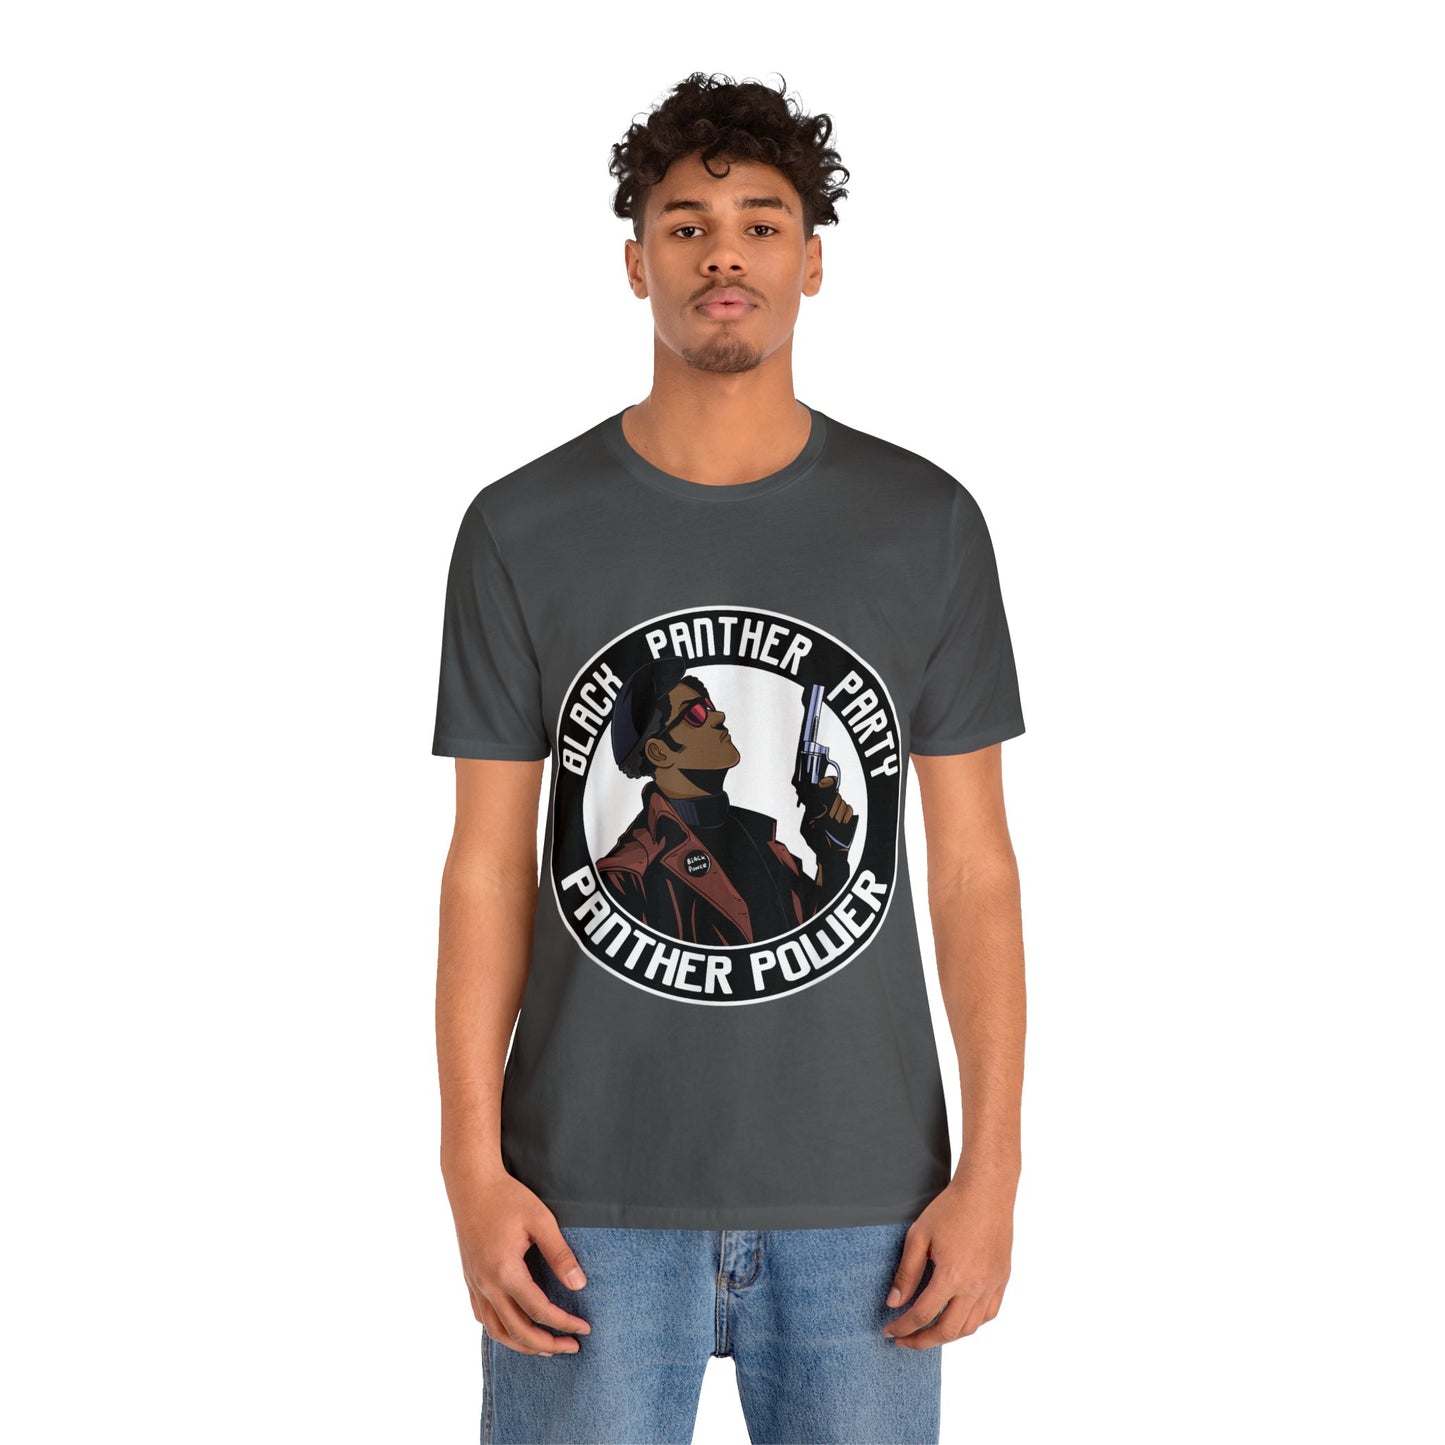 BLACK PANTHER PARTY - Unisex Jersey Short Sleeve Tee